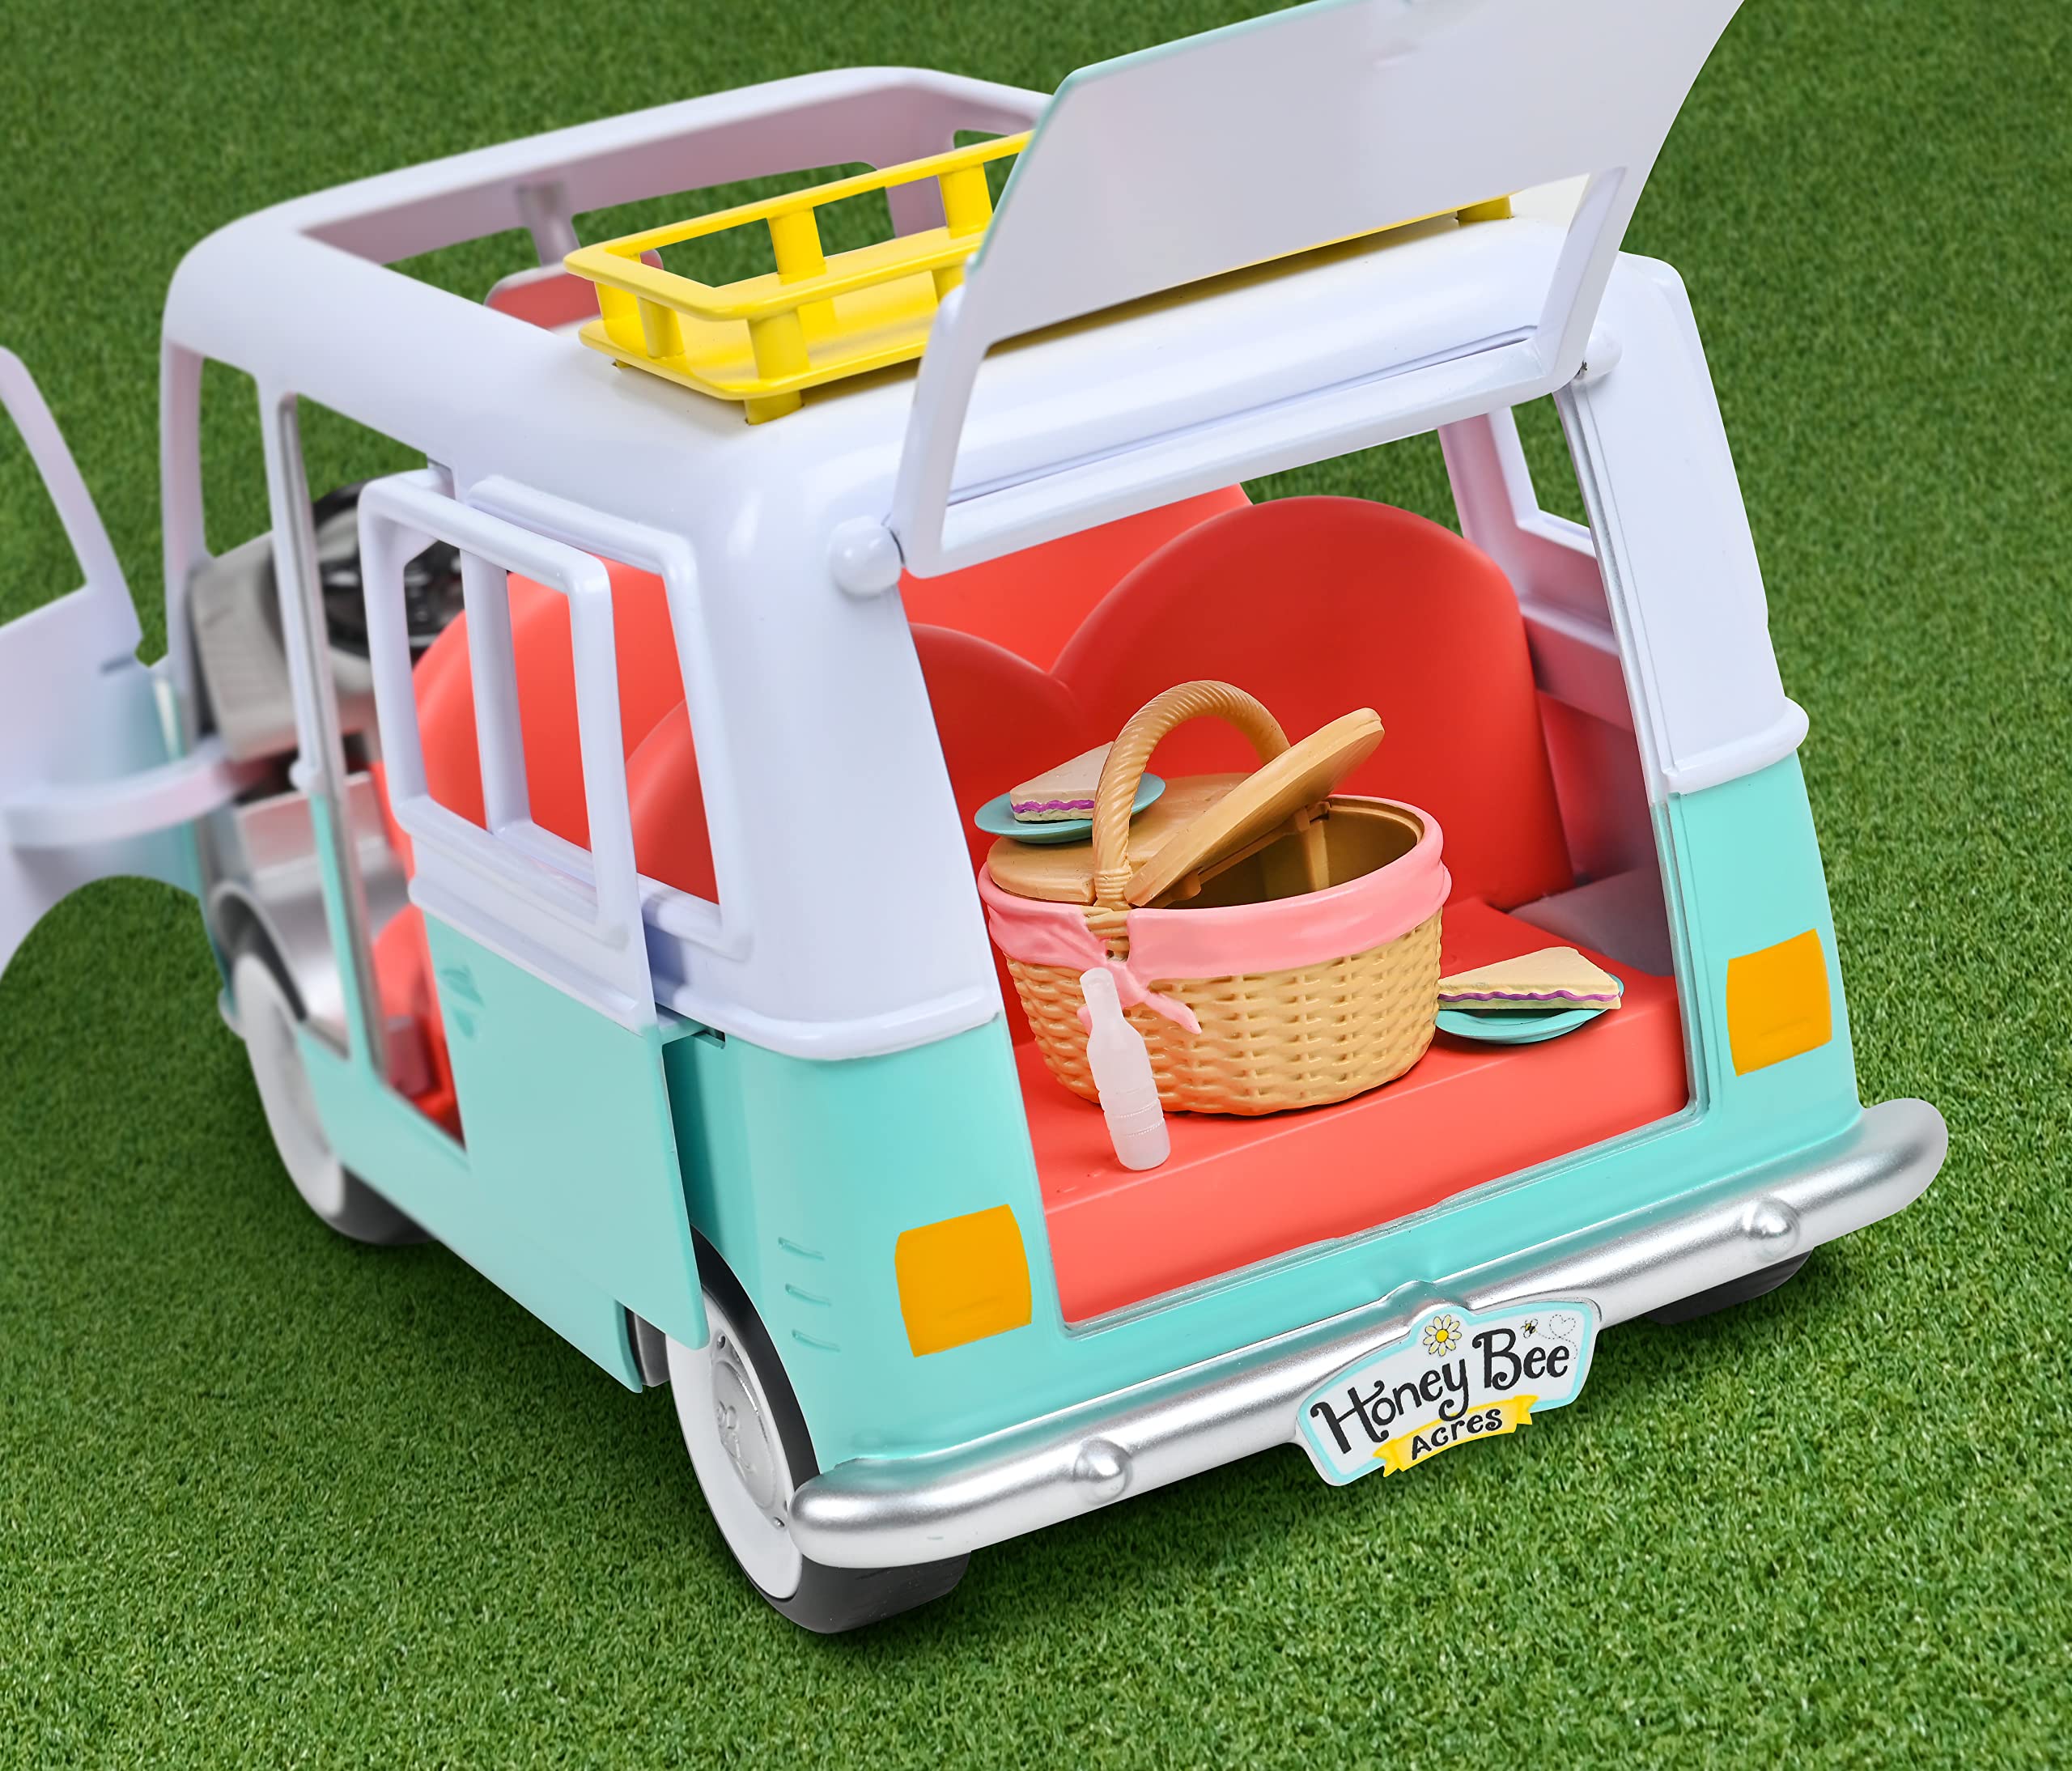 Sunny Days Entertainment Honey Bee Acres Around Town Van - 14 Accessory Pieces and Exclusive Doll | Flocked Collectible Figures